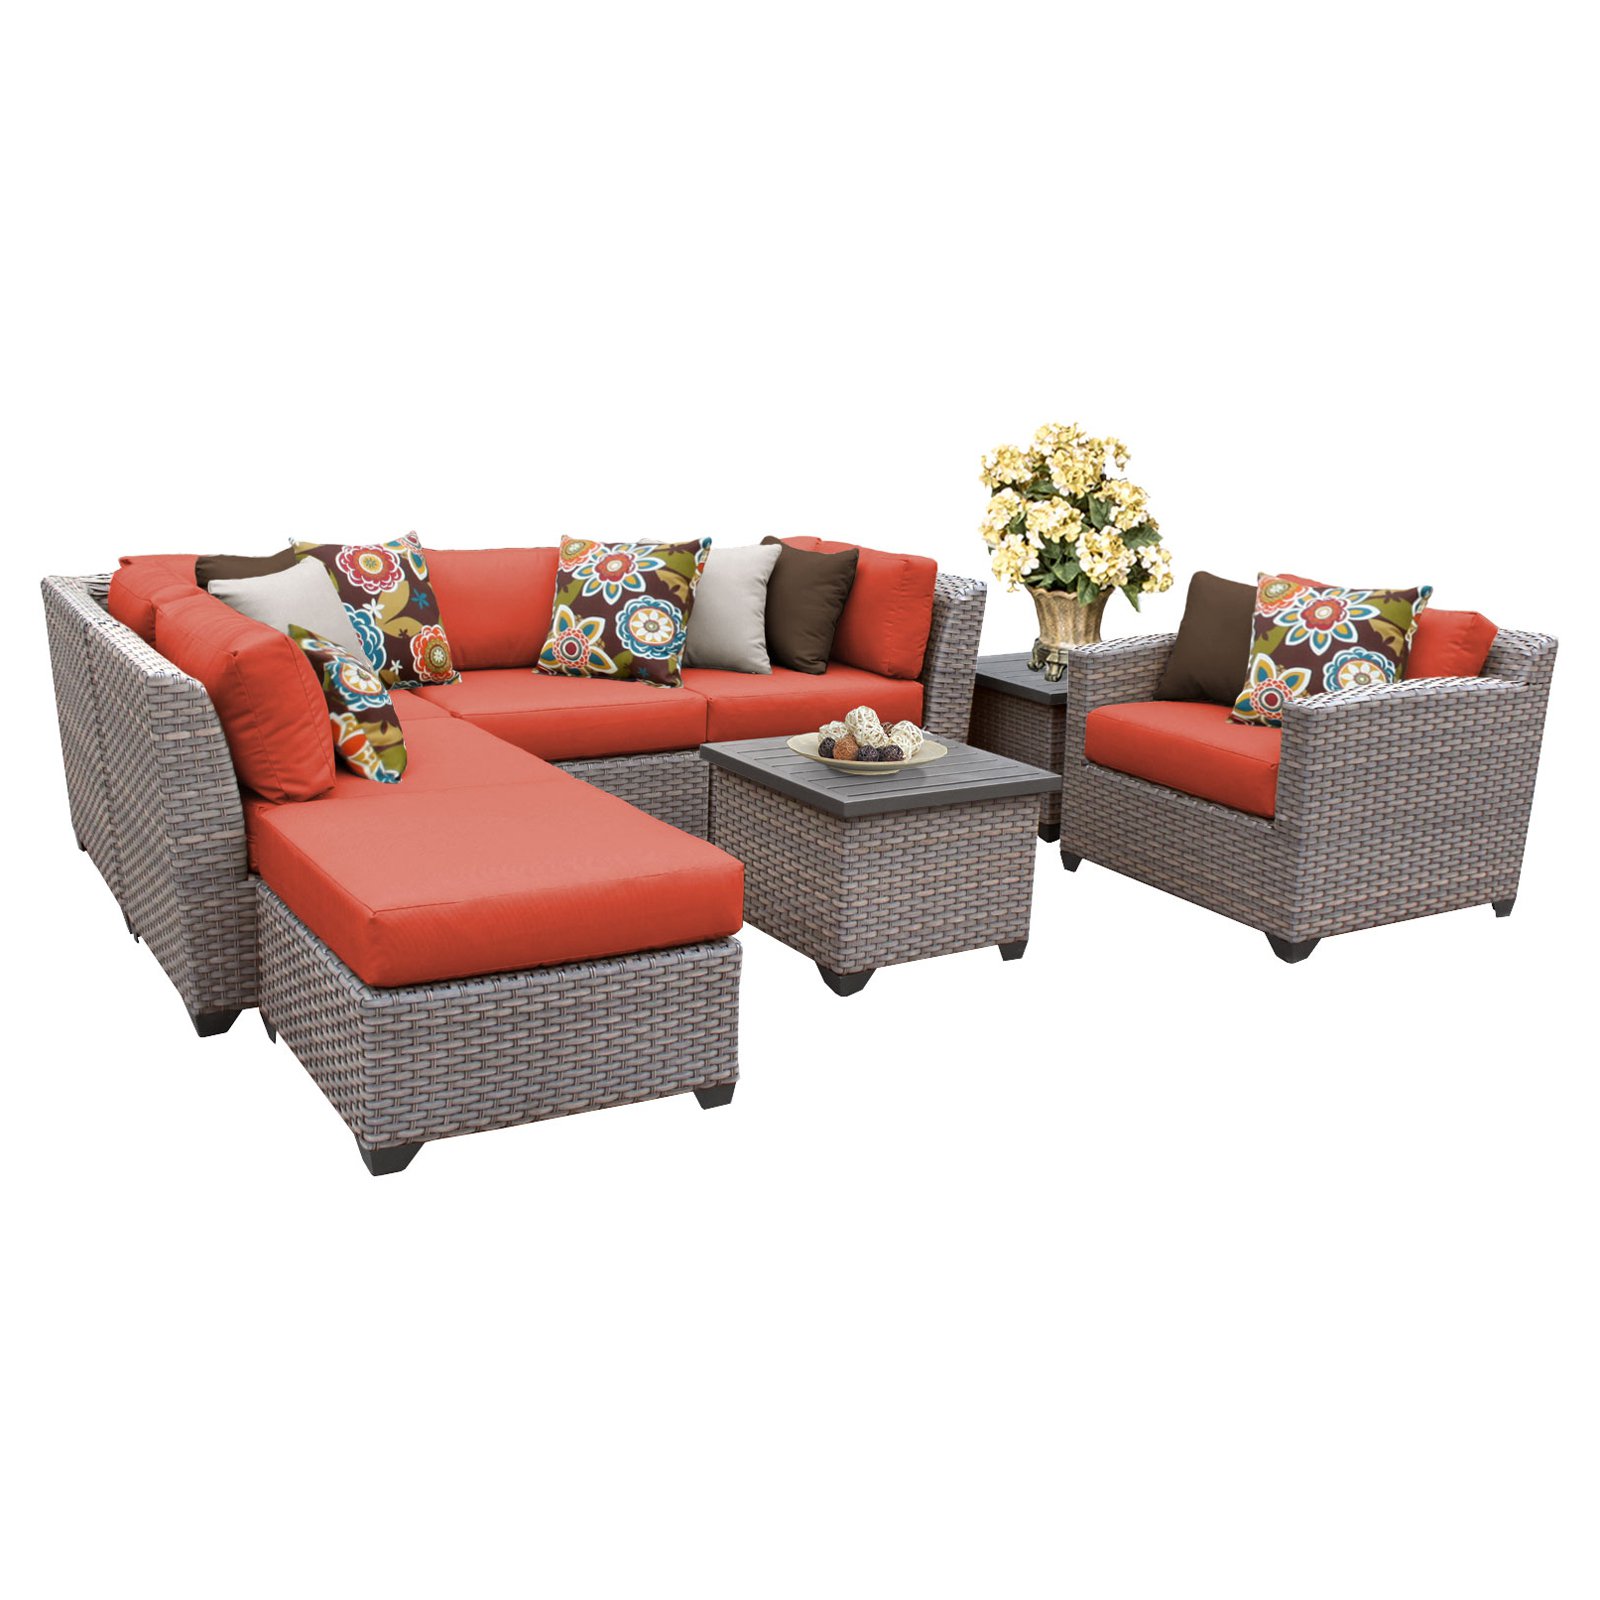 TK Classics Florence Wicker 8 Piece Patio Conversation Set with End Table and 2 Sets of Cushion Covers - image 5 of 12